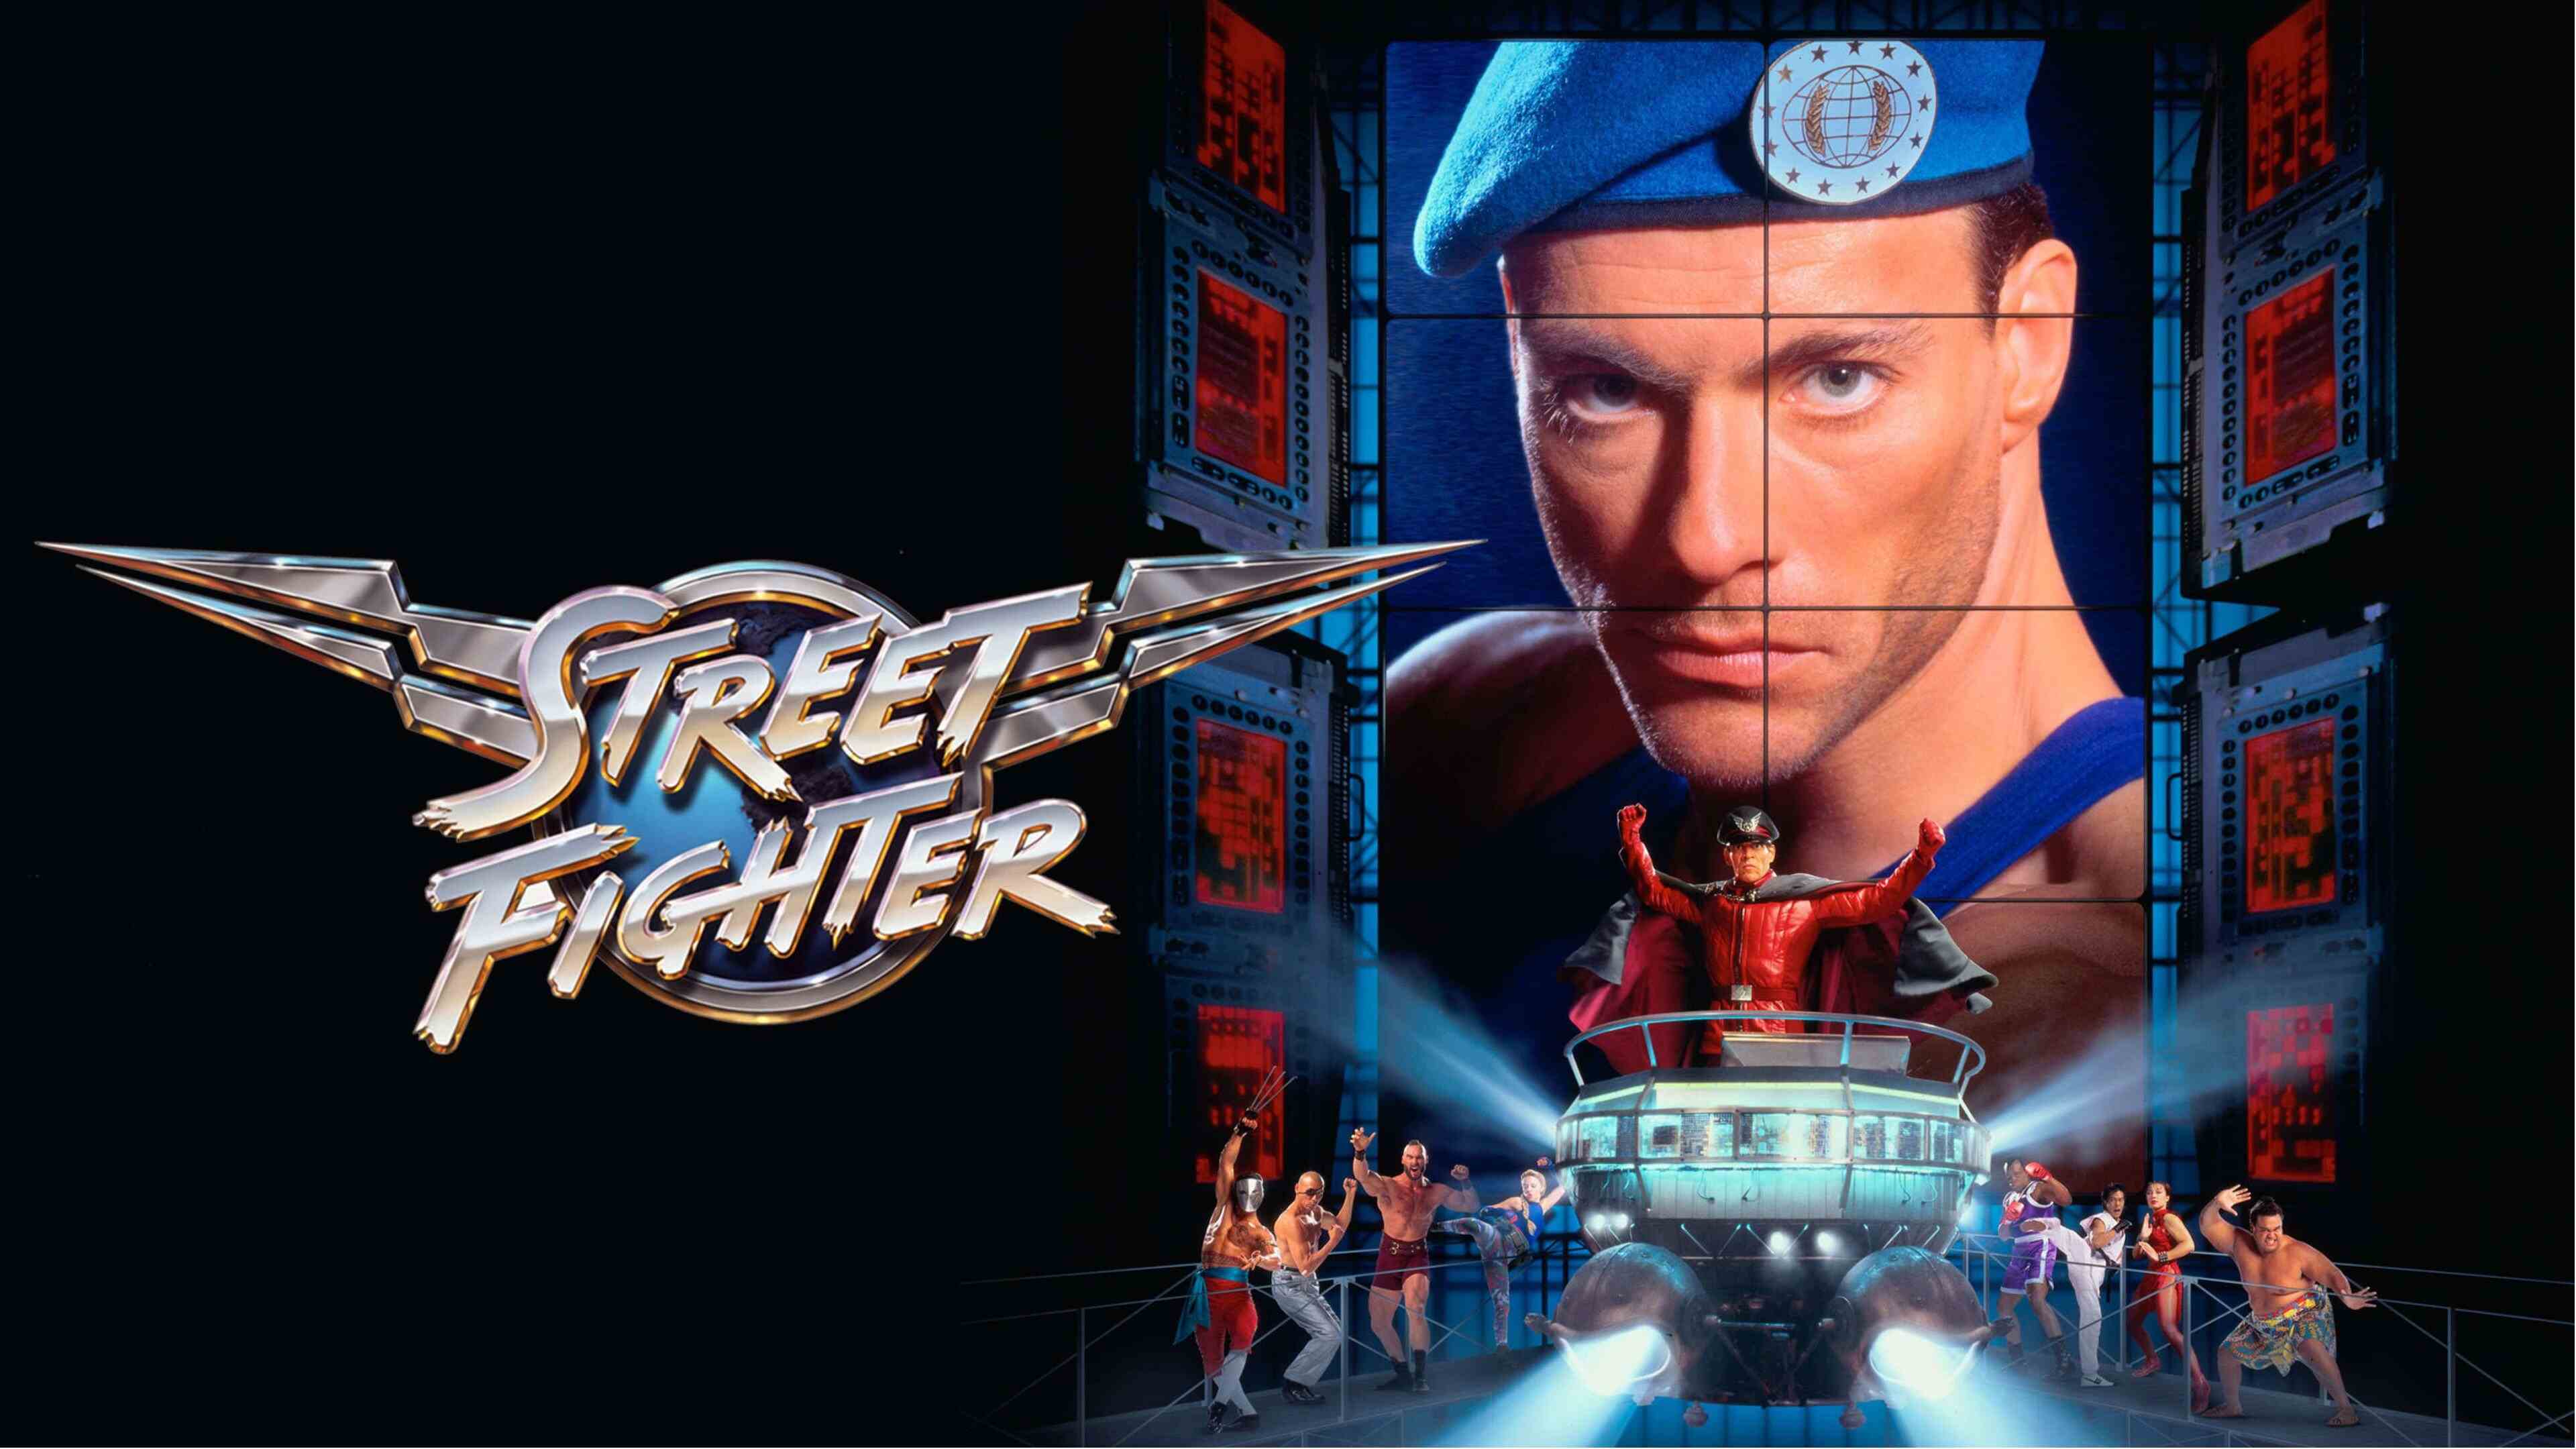 46-facts-about-the-movie-the-street-fighter